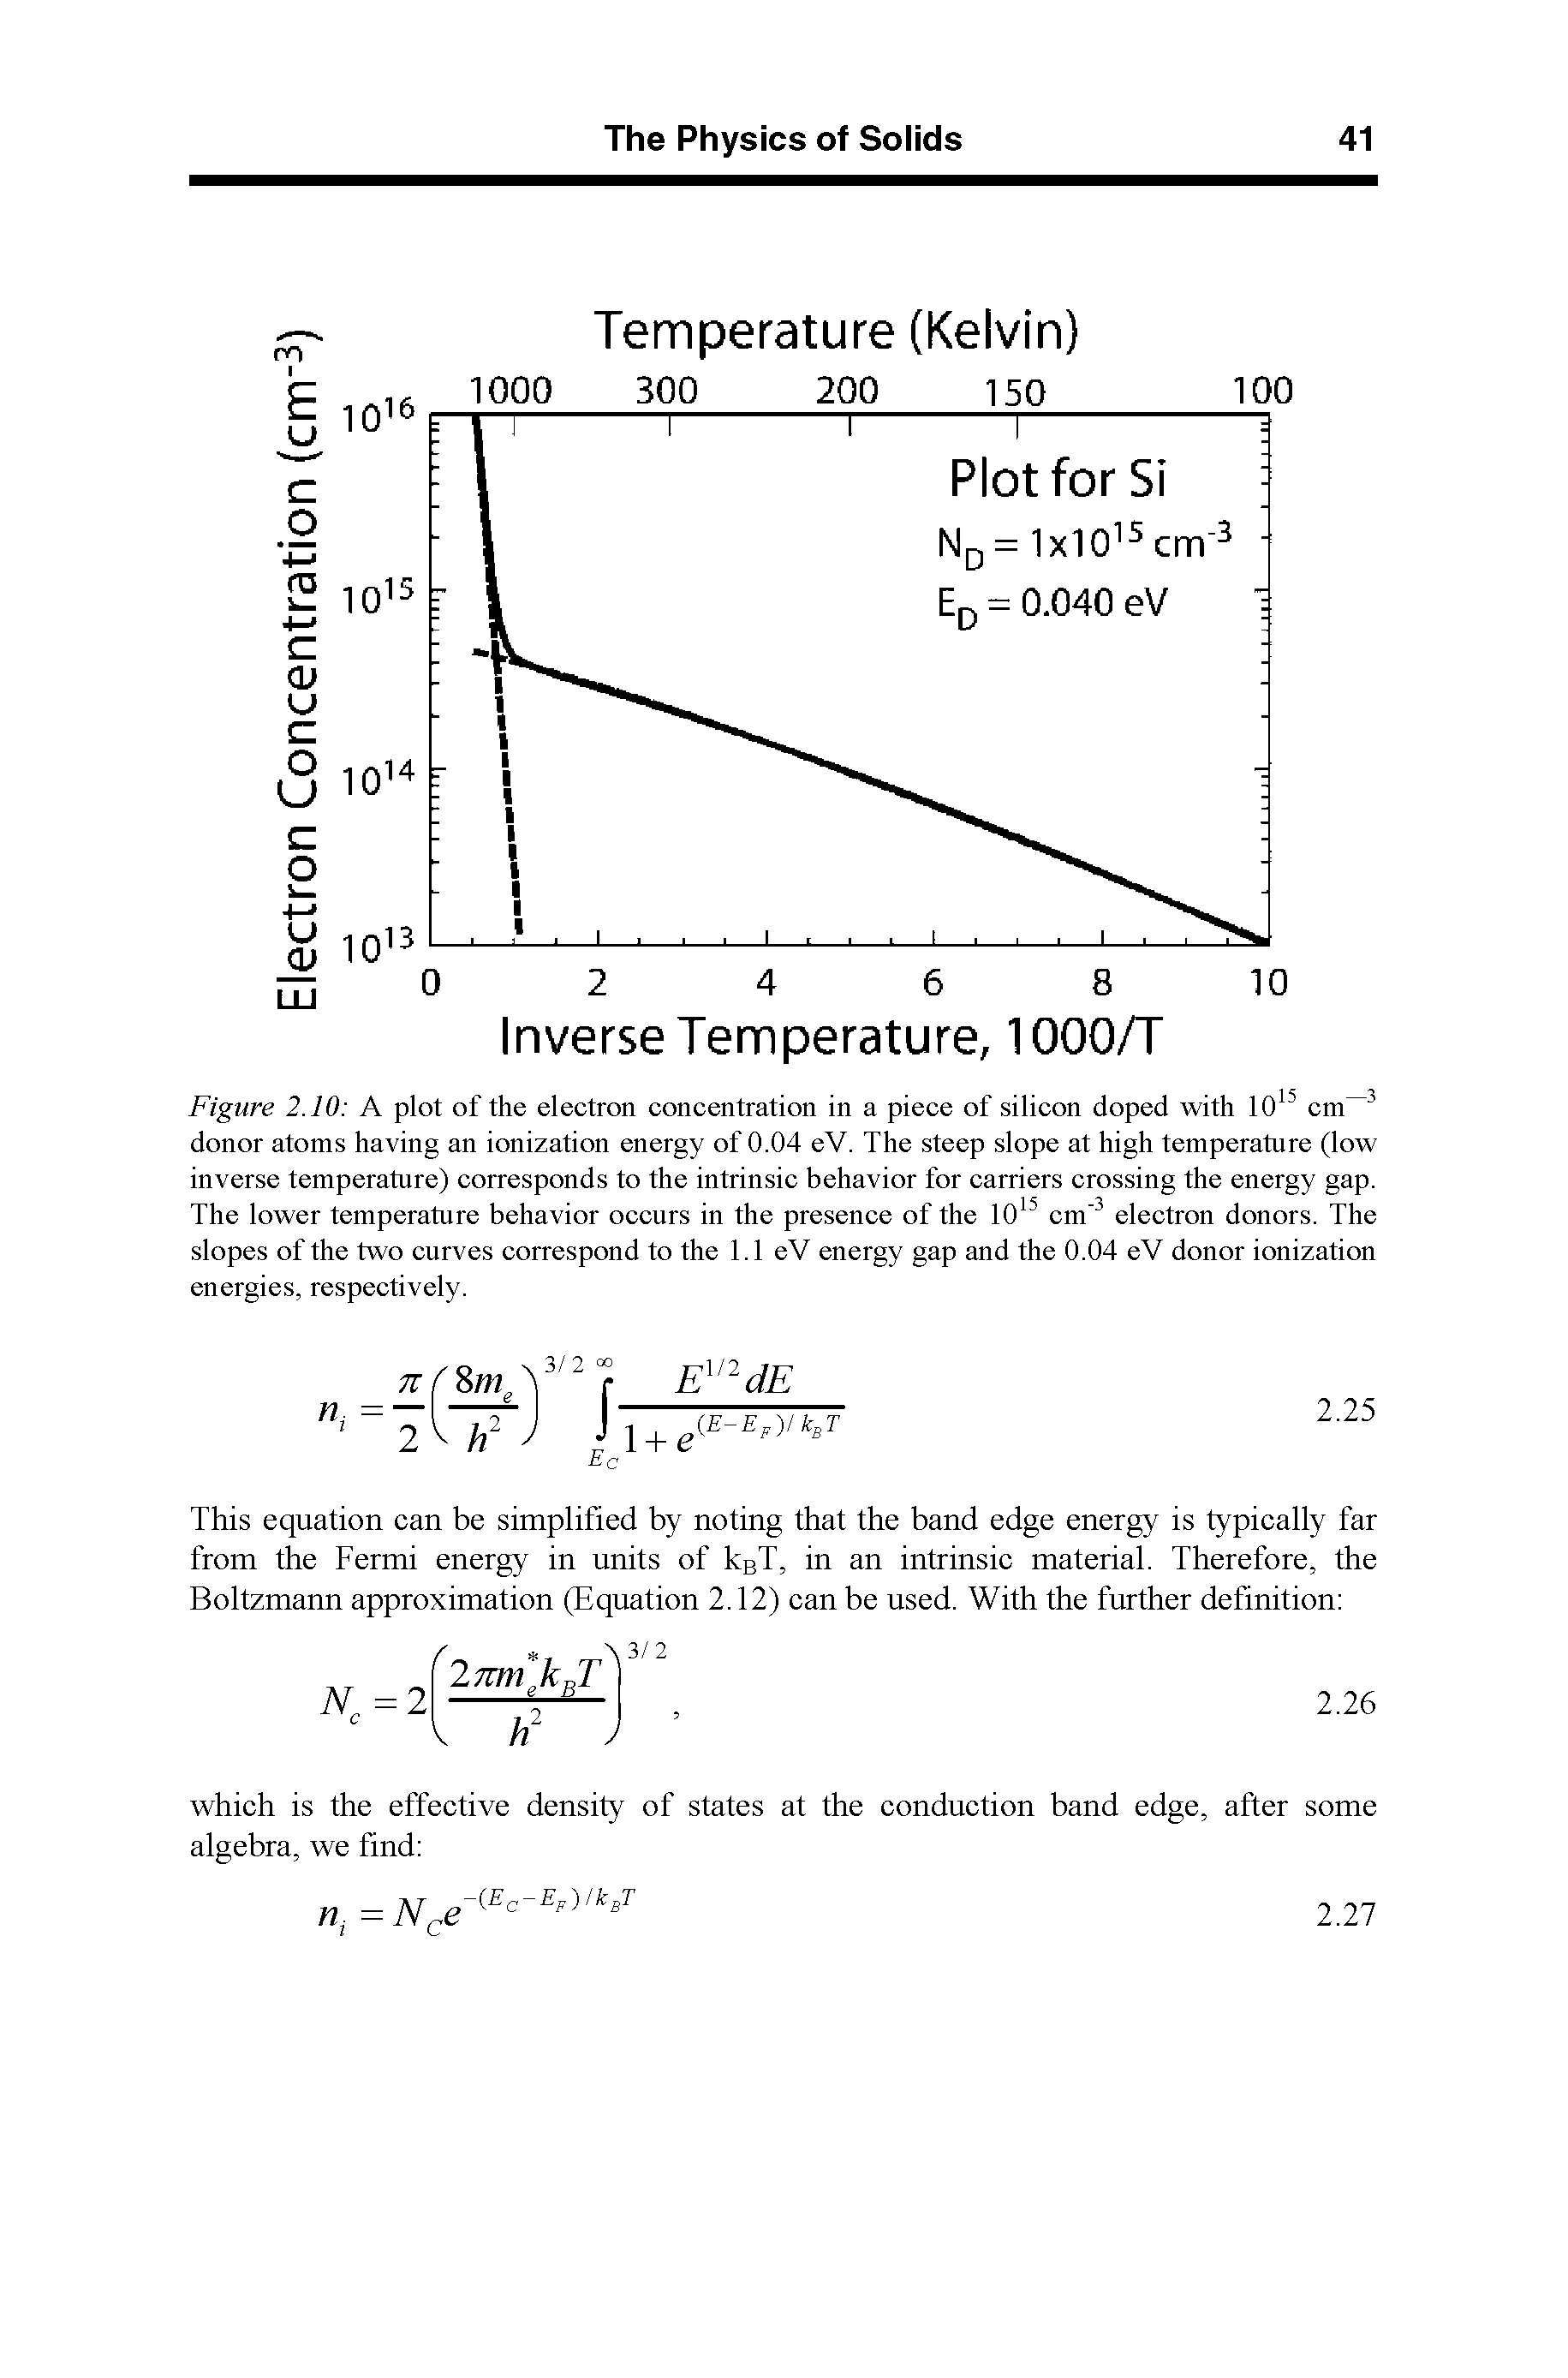 Figure 2.10 A plot of the electron concentration in a piece of silicon doped with 10 cm donor atoms having an ionization energy of 0.04 eV. The steep slope at high temperature (low inverse temperature) corresponds to the intrinsic behavior for carriers crossing the energy gap. The lower temperature behavior occurs in the presence of the 10 cm electron donors. The slopes of the two curves correspond to the 1.1 eV energy gap and the 0.04 eV donor ionization energies, respectively.